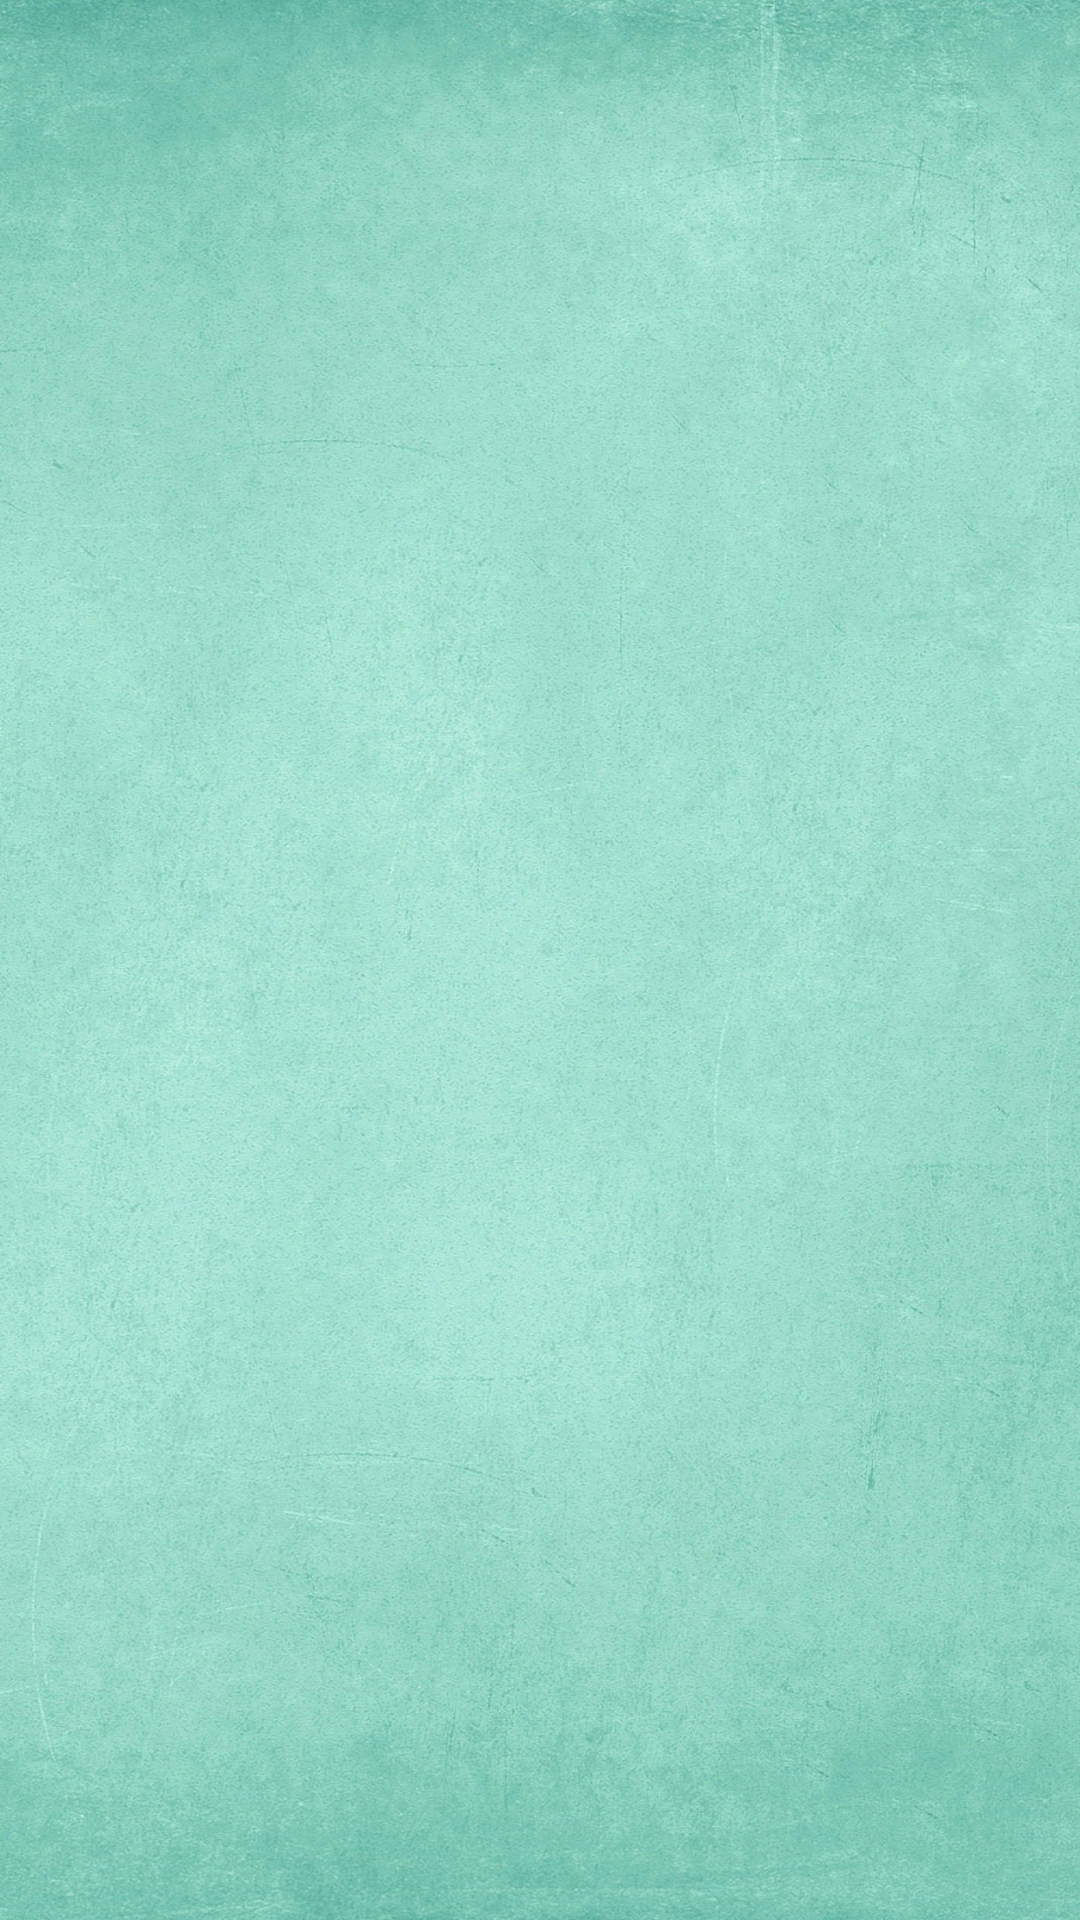 Light Blue Abstract Iphone 6 Wallpapers Hd - Tints And Shades - HD Wallpaper 